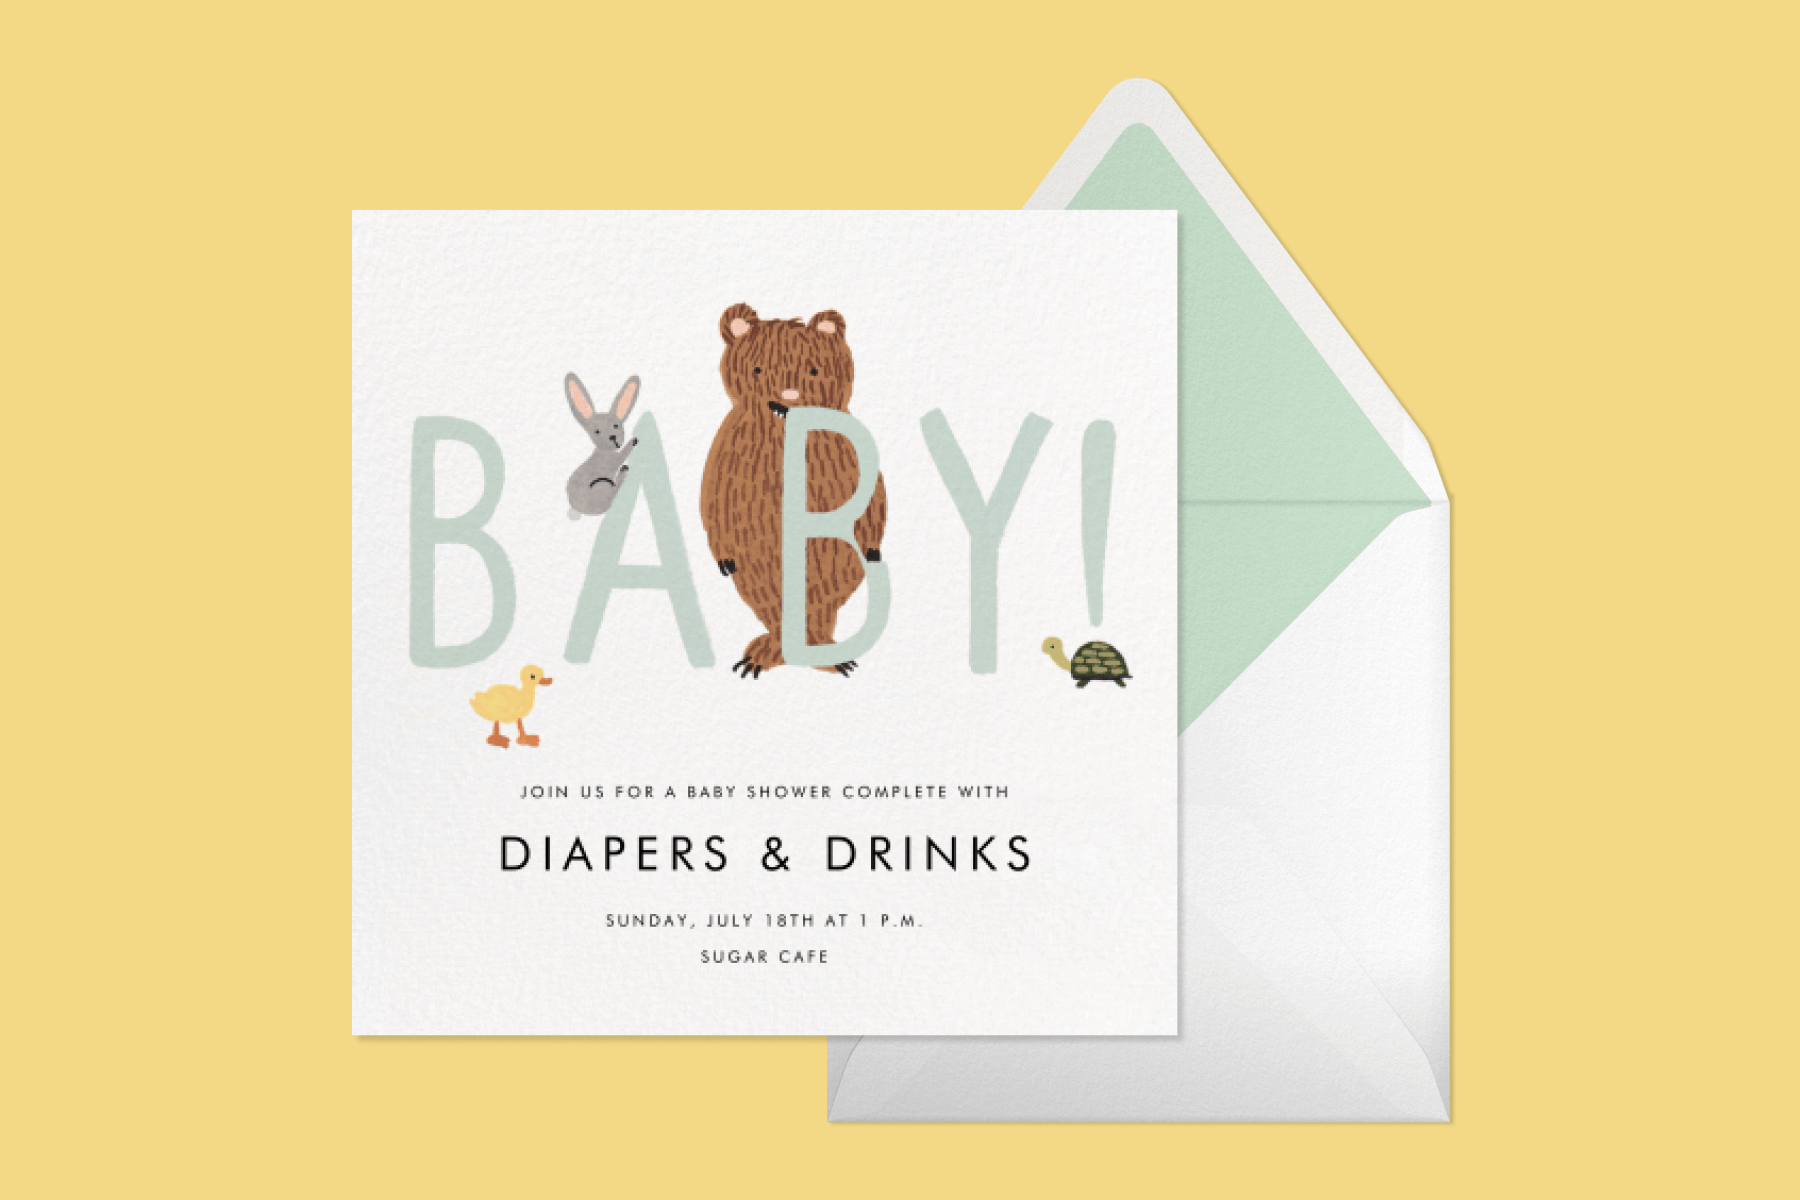 A baby shower invitation featuring the big word "Baby!" surrounded by cute forest creatures.